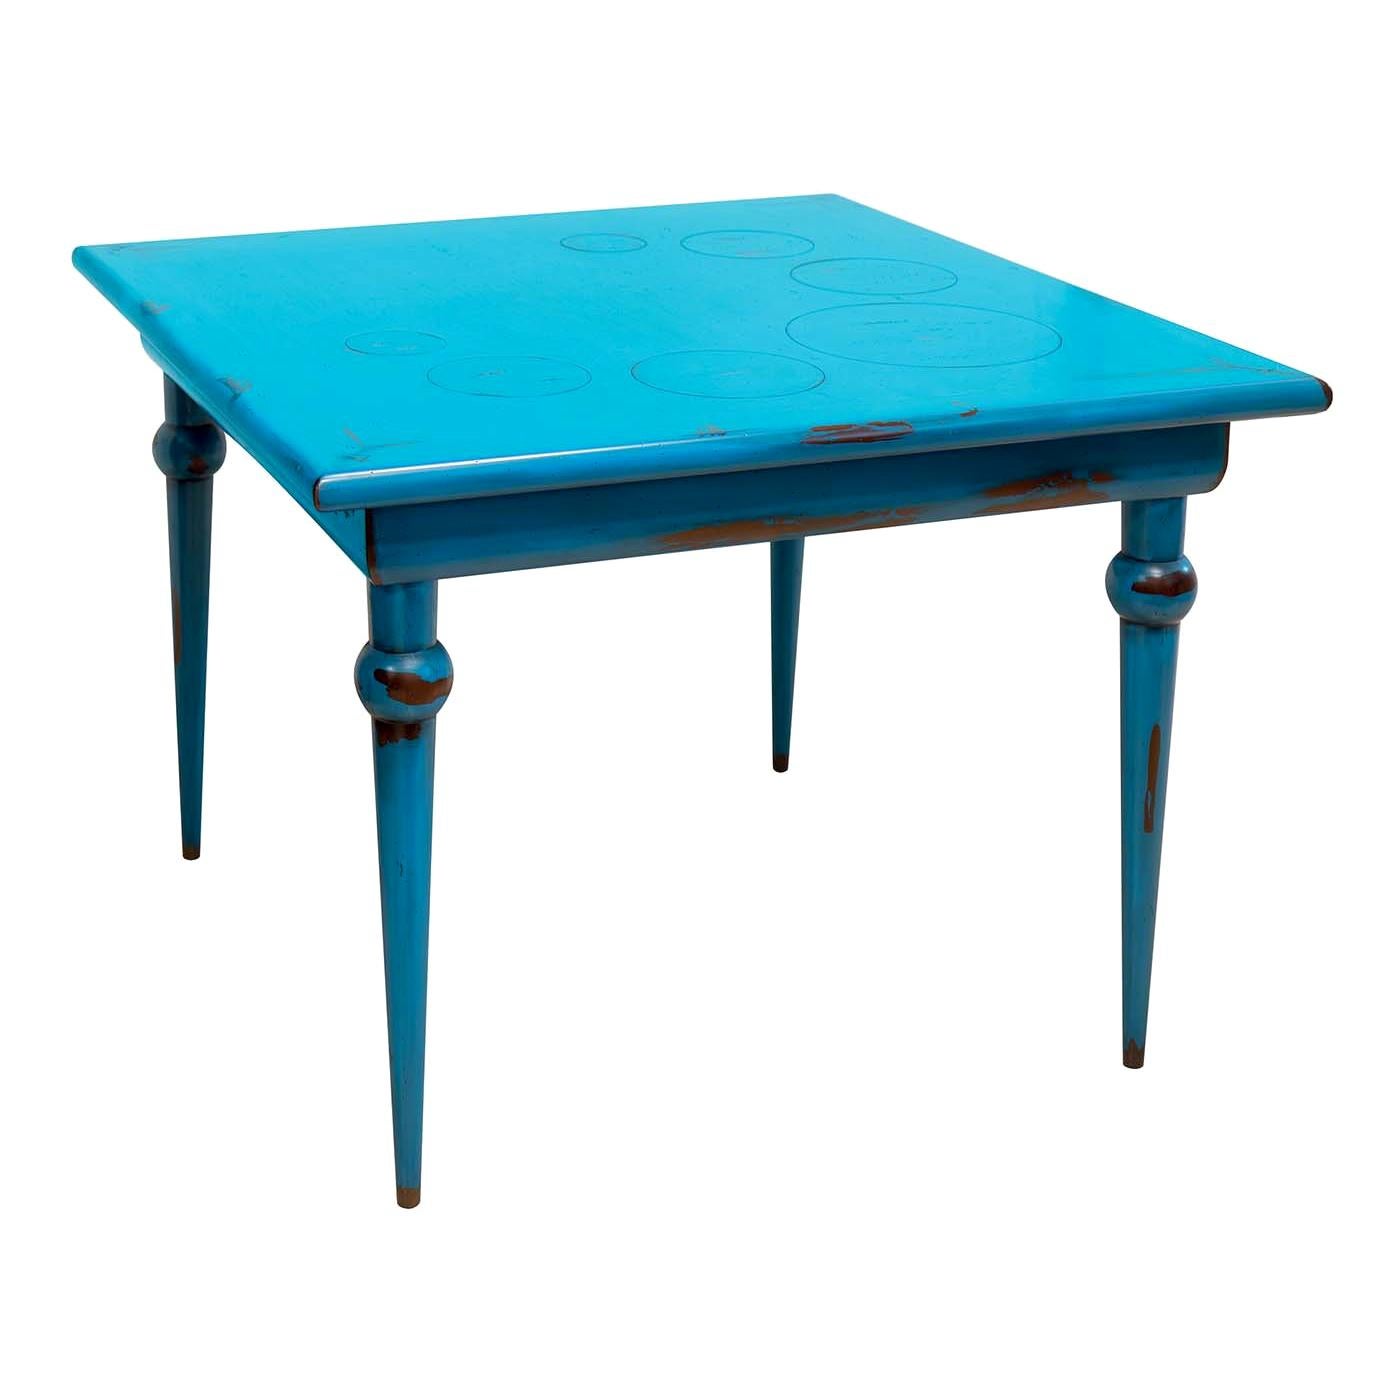 Le Bolle Blue Square Table For Sale